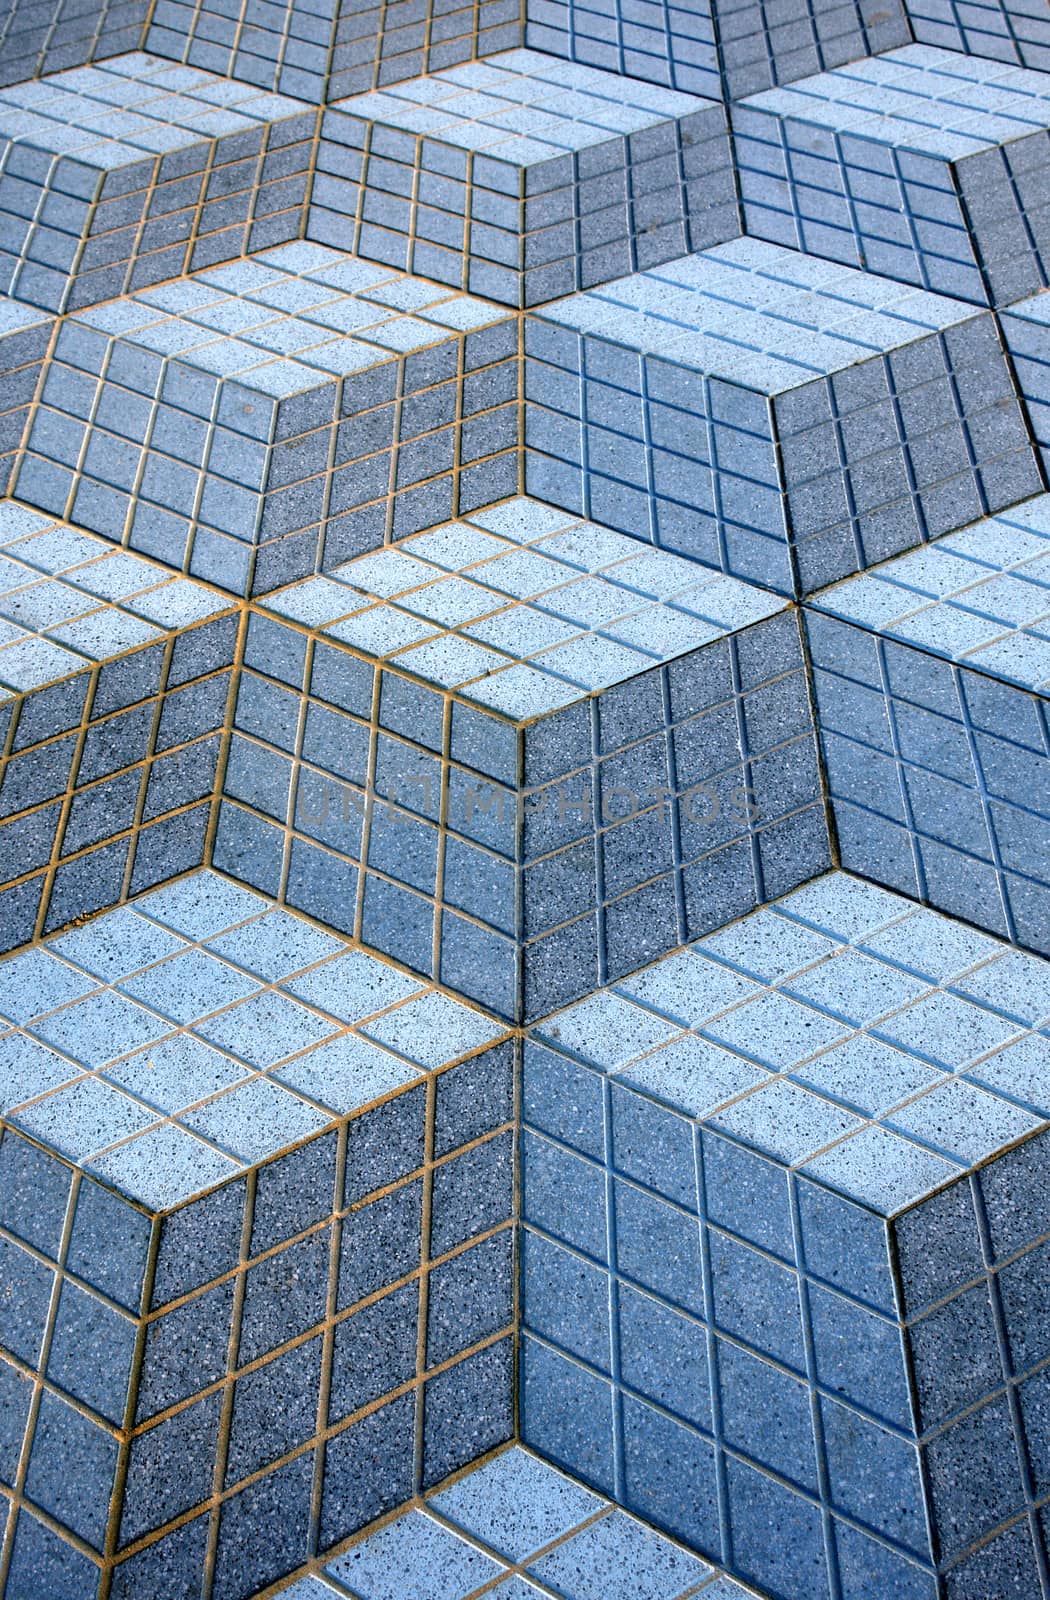 Street paving cubic design by ptxgarfield